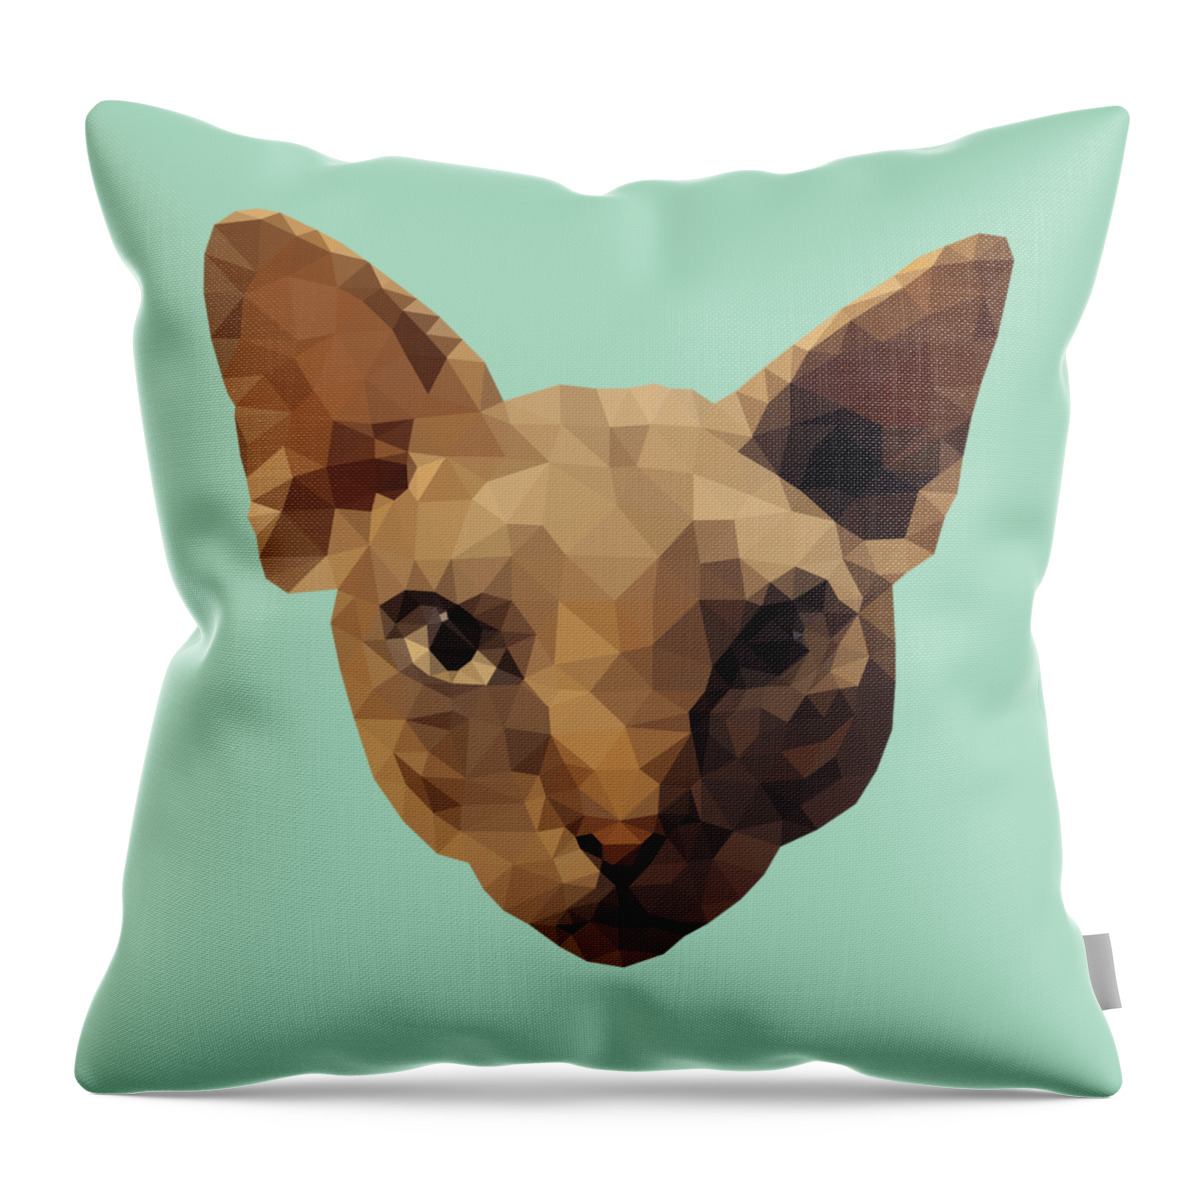 Sphynx Throw Pillow featuring the digital art Sphynx Cat by Jindra Noewi